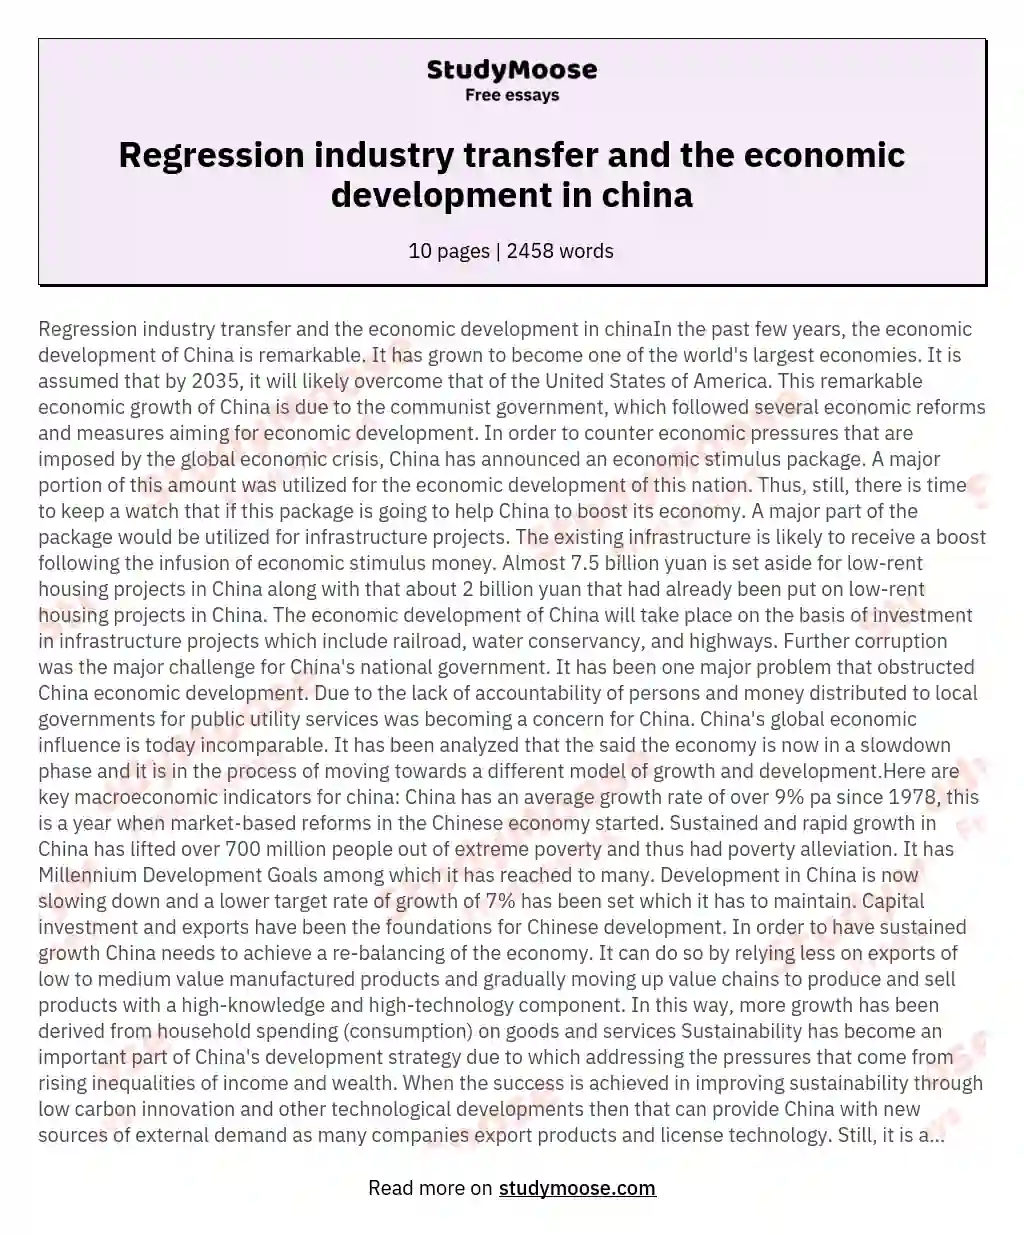 Regression industry transfer and the economic development in china